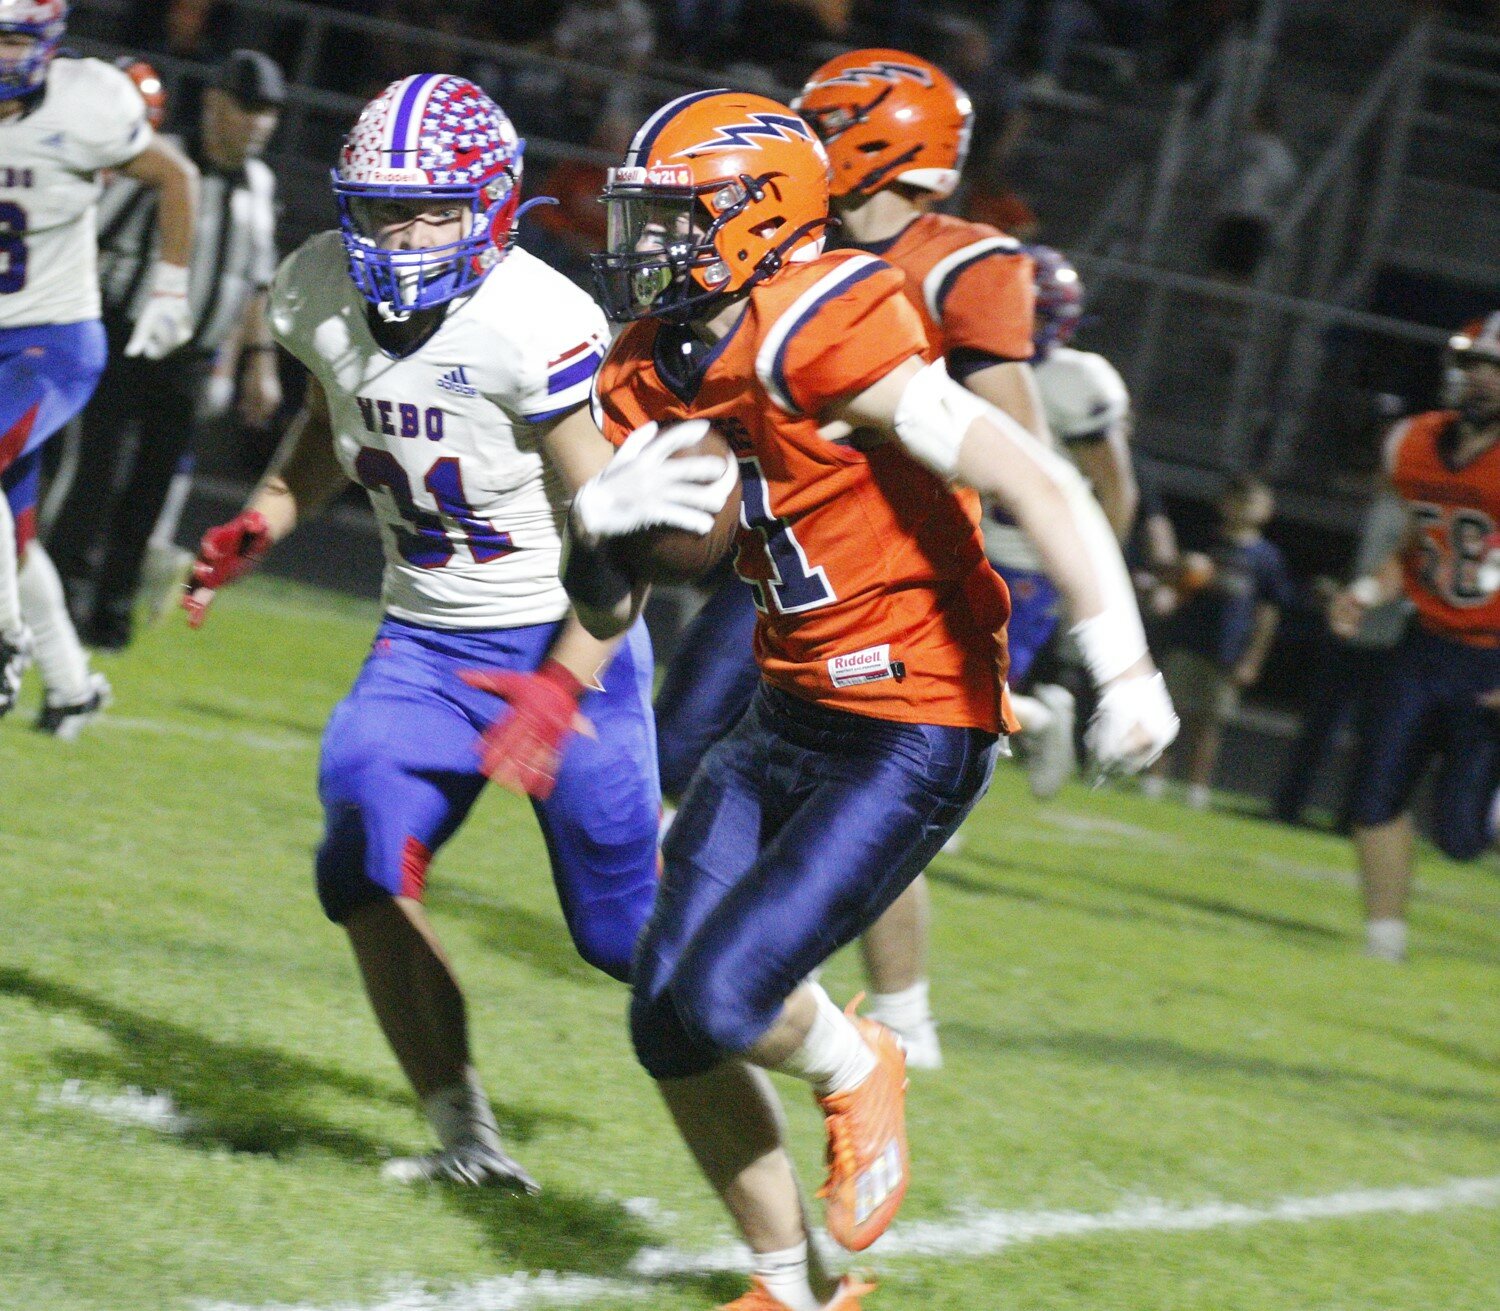 Junior Kelby Harwood had 5 catches for 83 yards in the Chargers 20-17 SAC win over WeBo. It was the Chargers first win over the Stars since 2014.